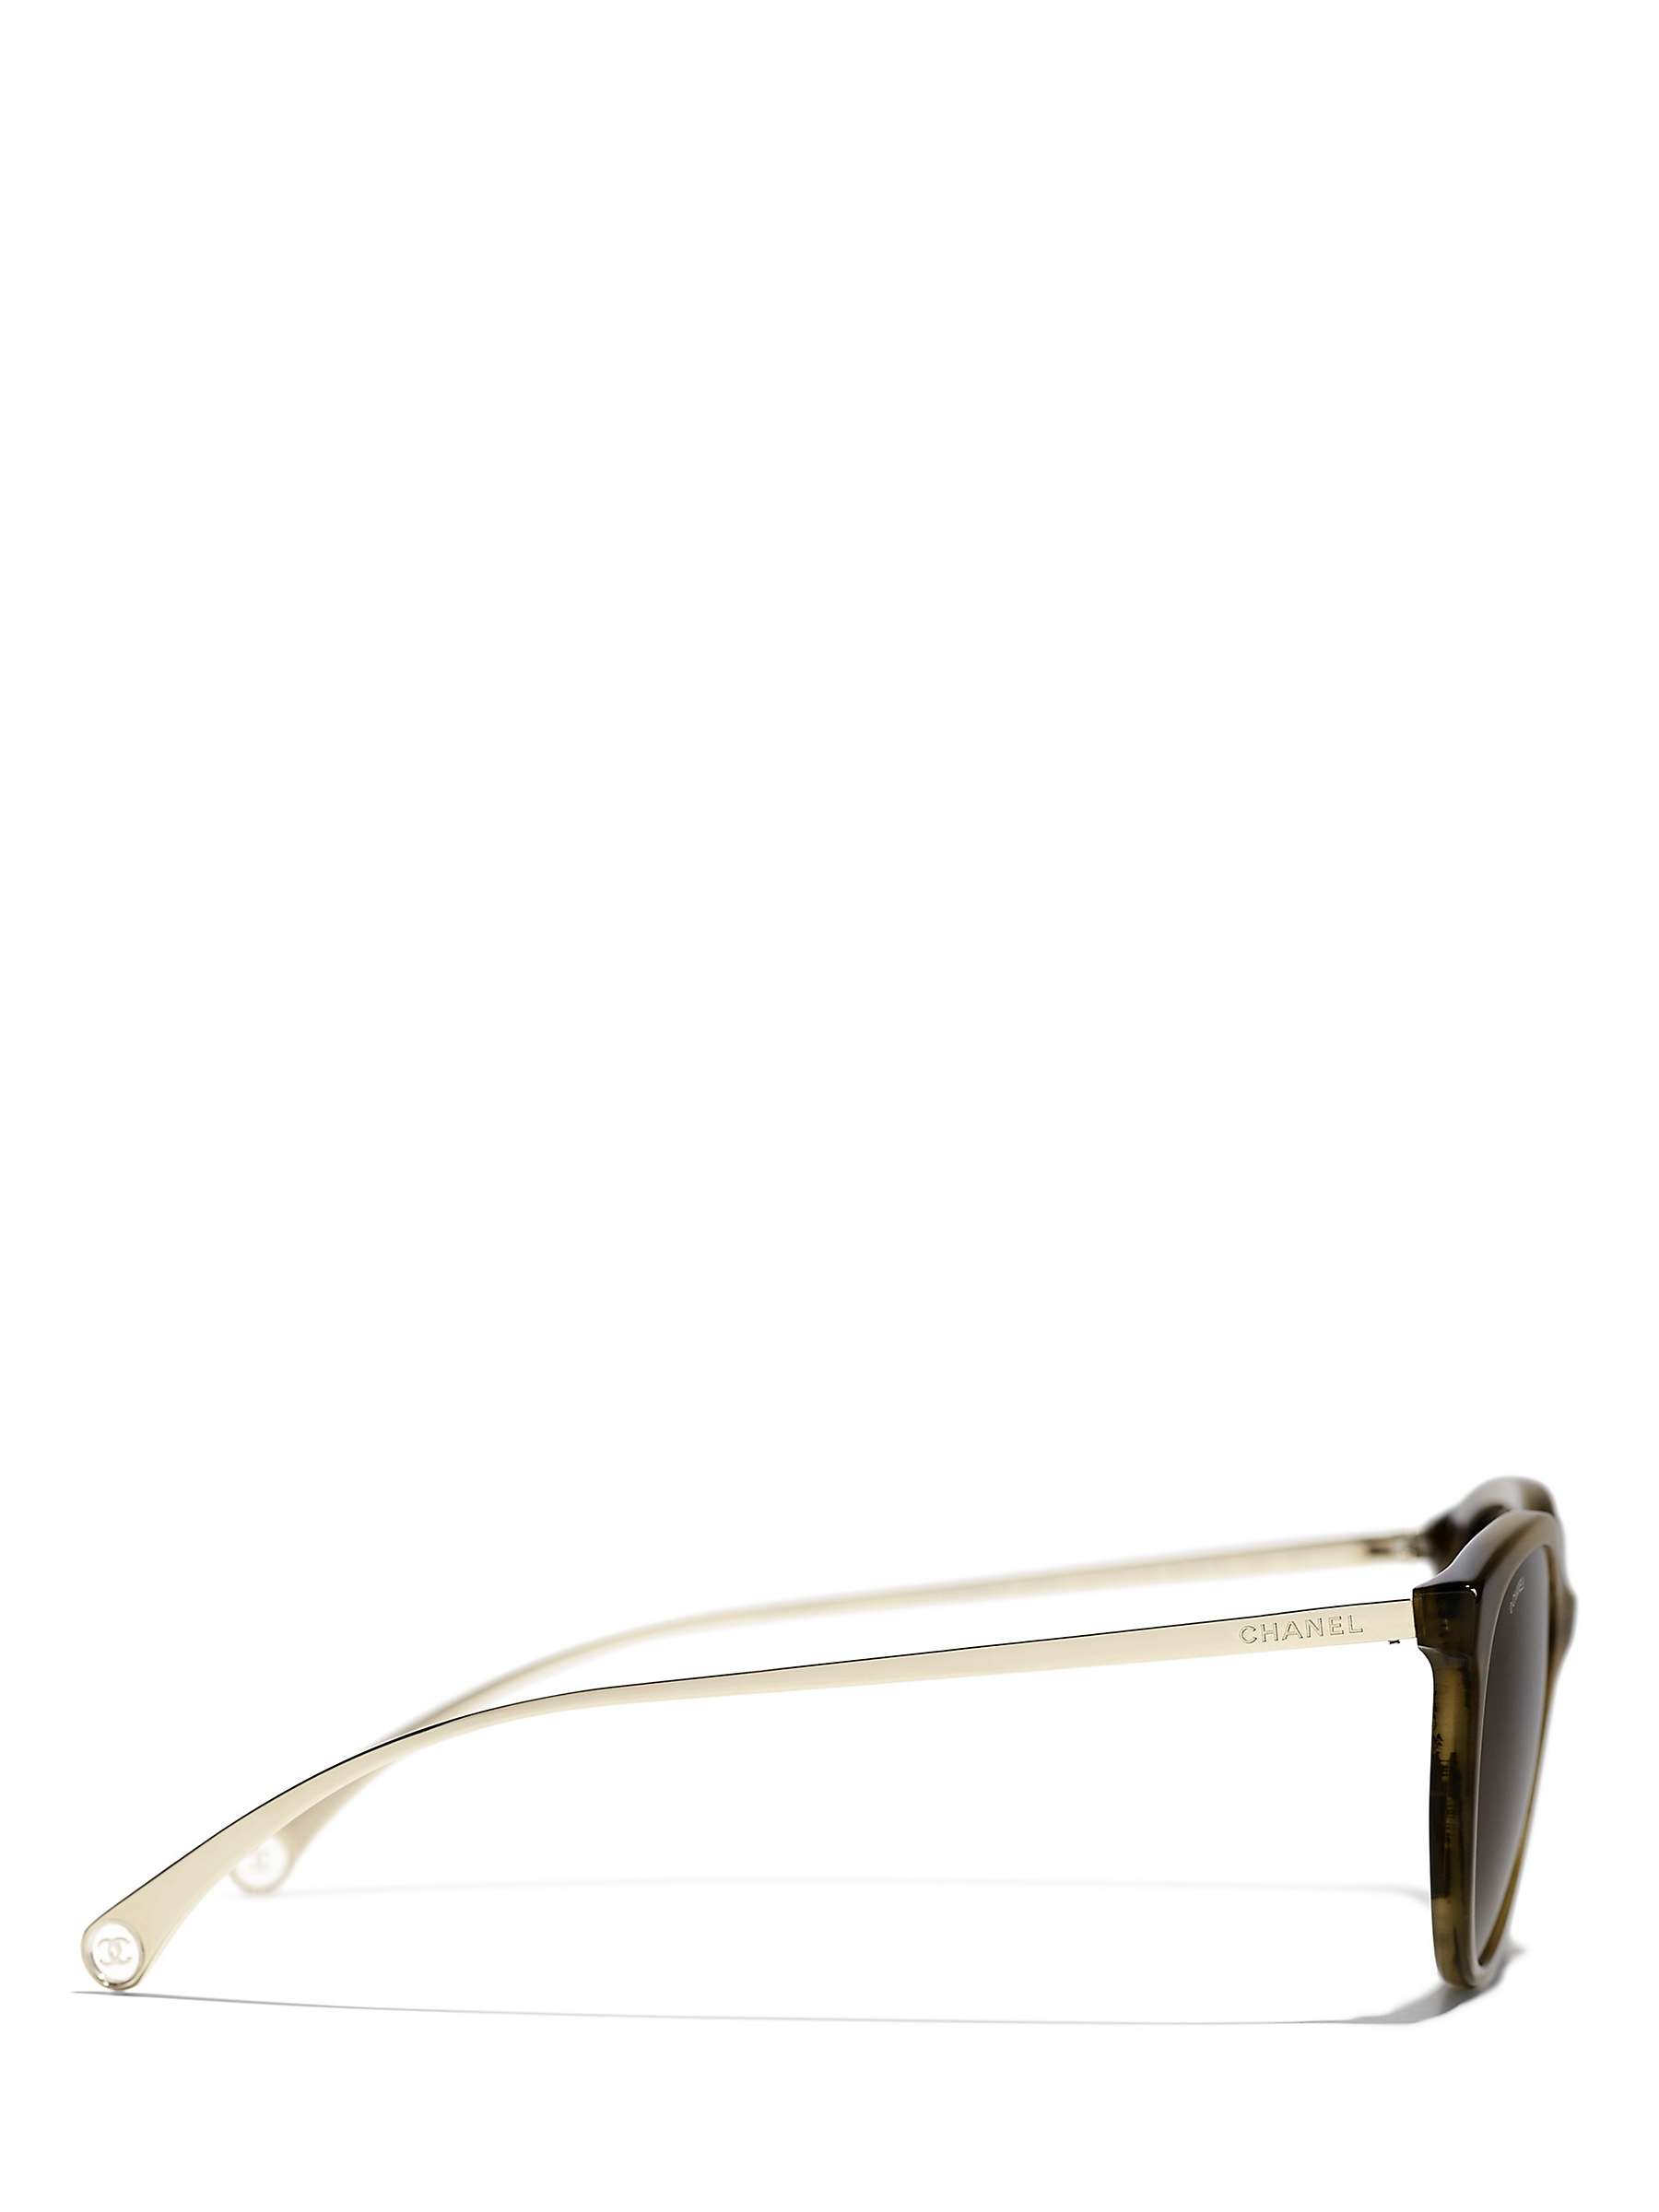 Buy CHANEL CH5459 Oval Sunglasses, Green/Brown Online at johnlewis.com